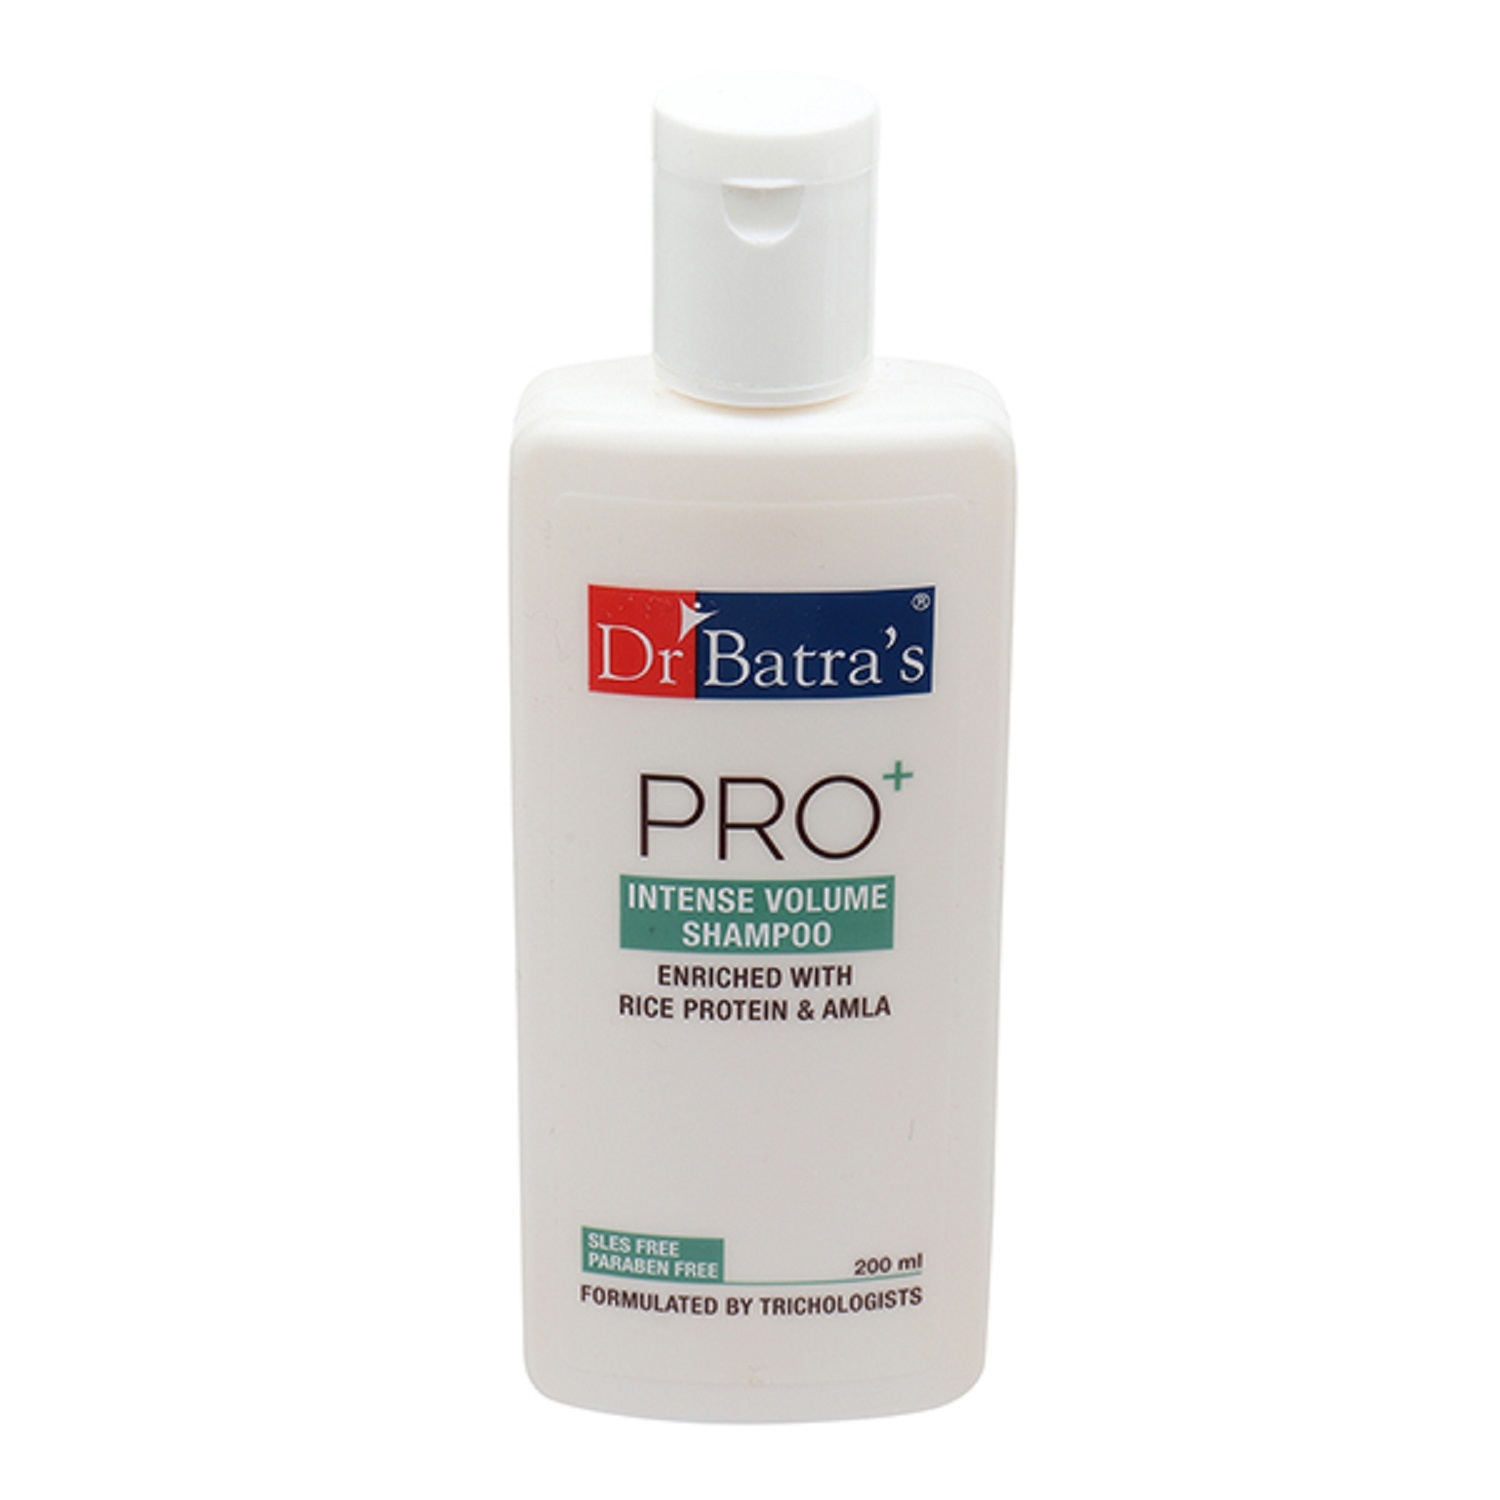 Dr Batra's | Dr Batra's Pro+ Intense Volume Shampoo Enriched With Rice protein & Amla - 200 ml